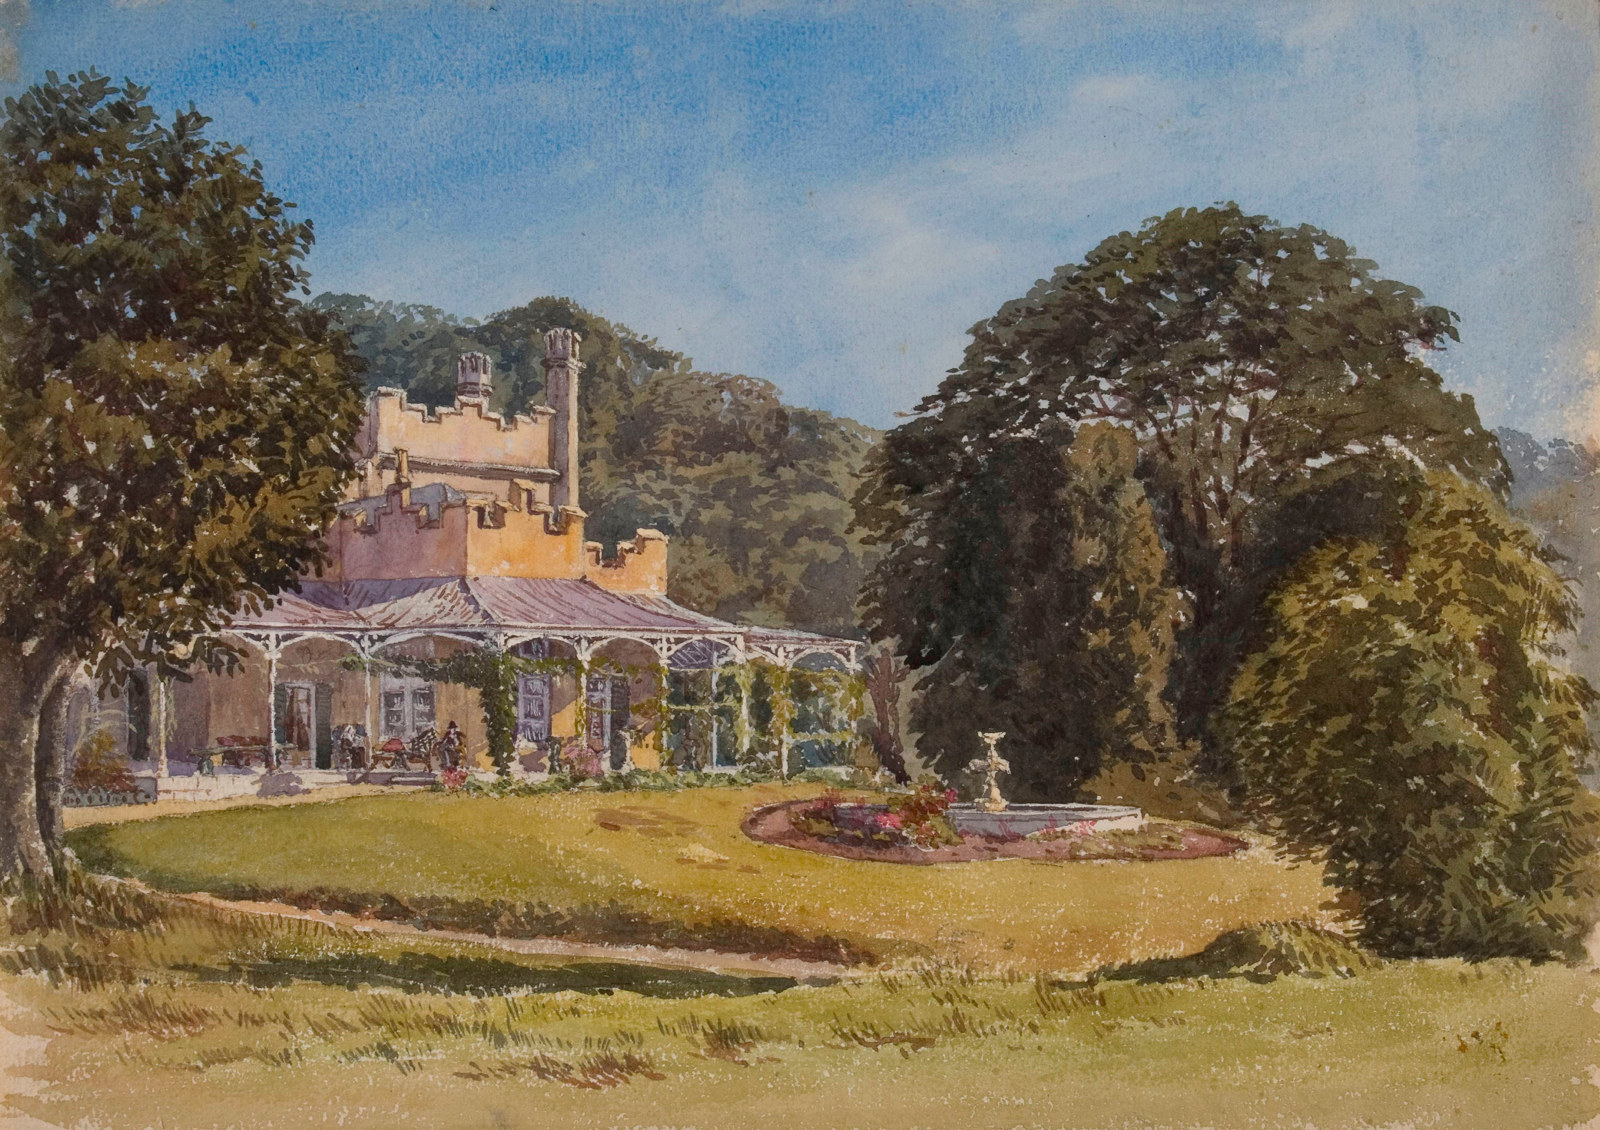 Watercolour painting of Vaucluse House created by Frederick L Fisher, 1874